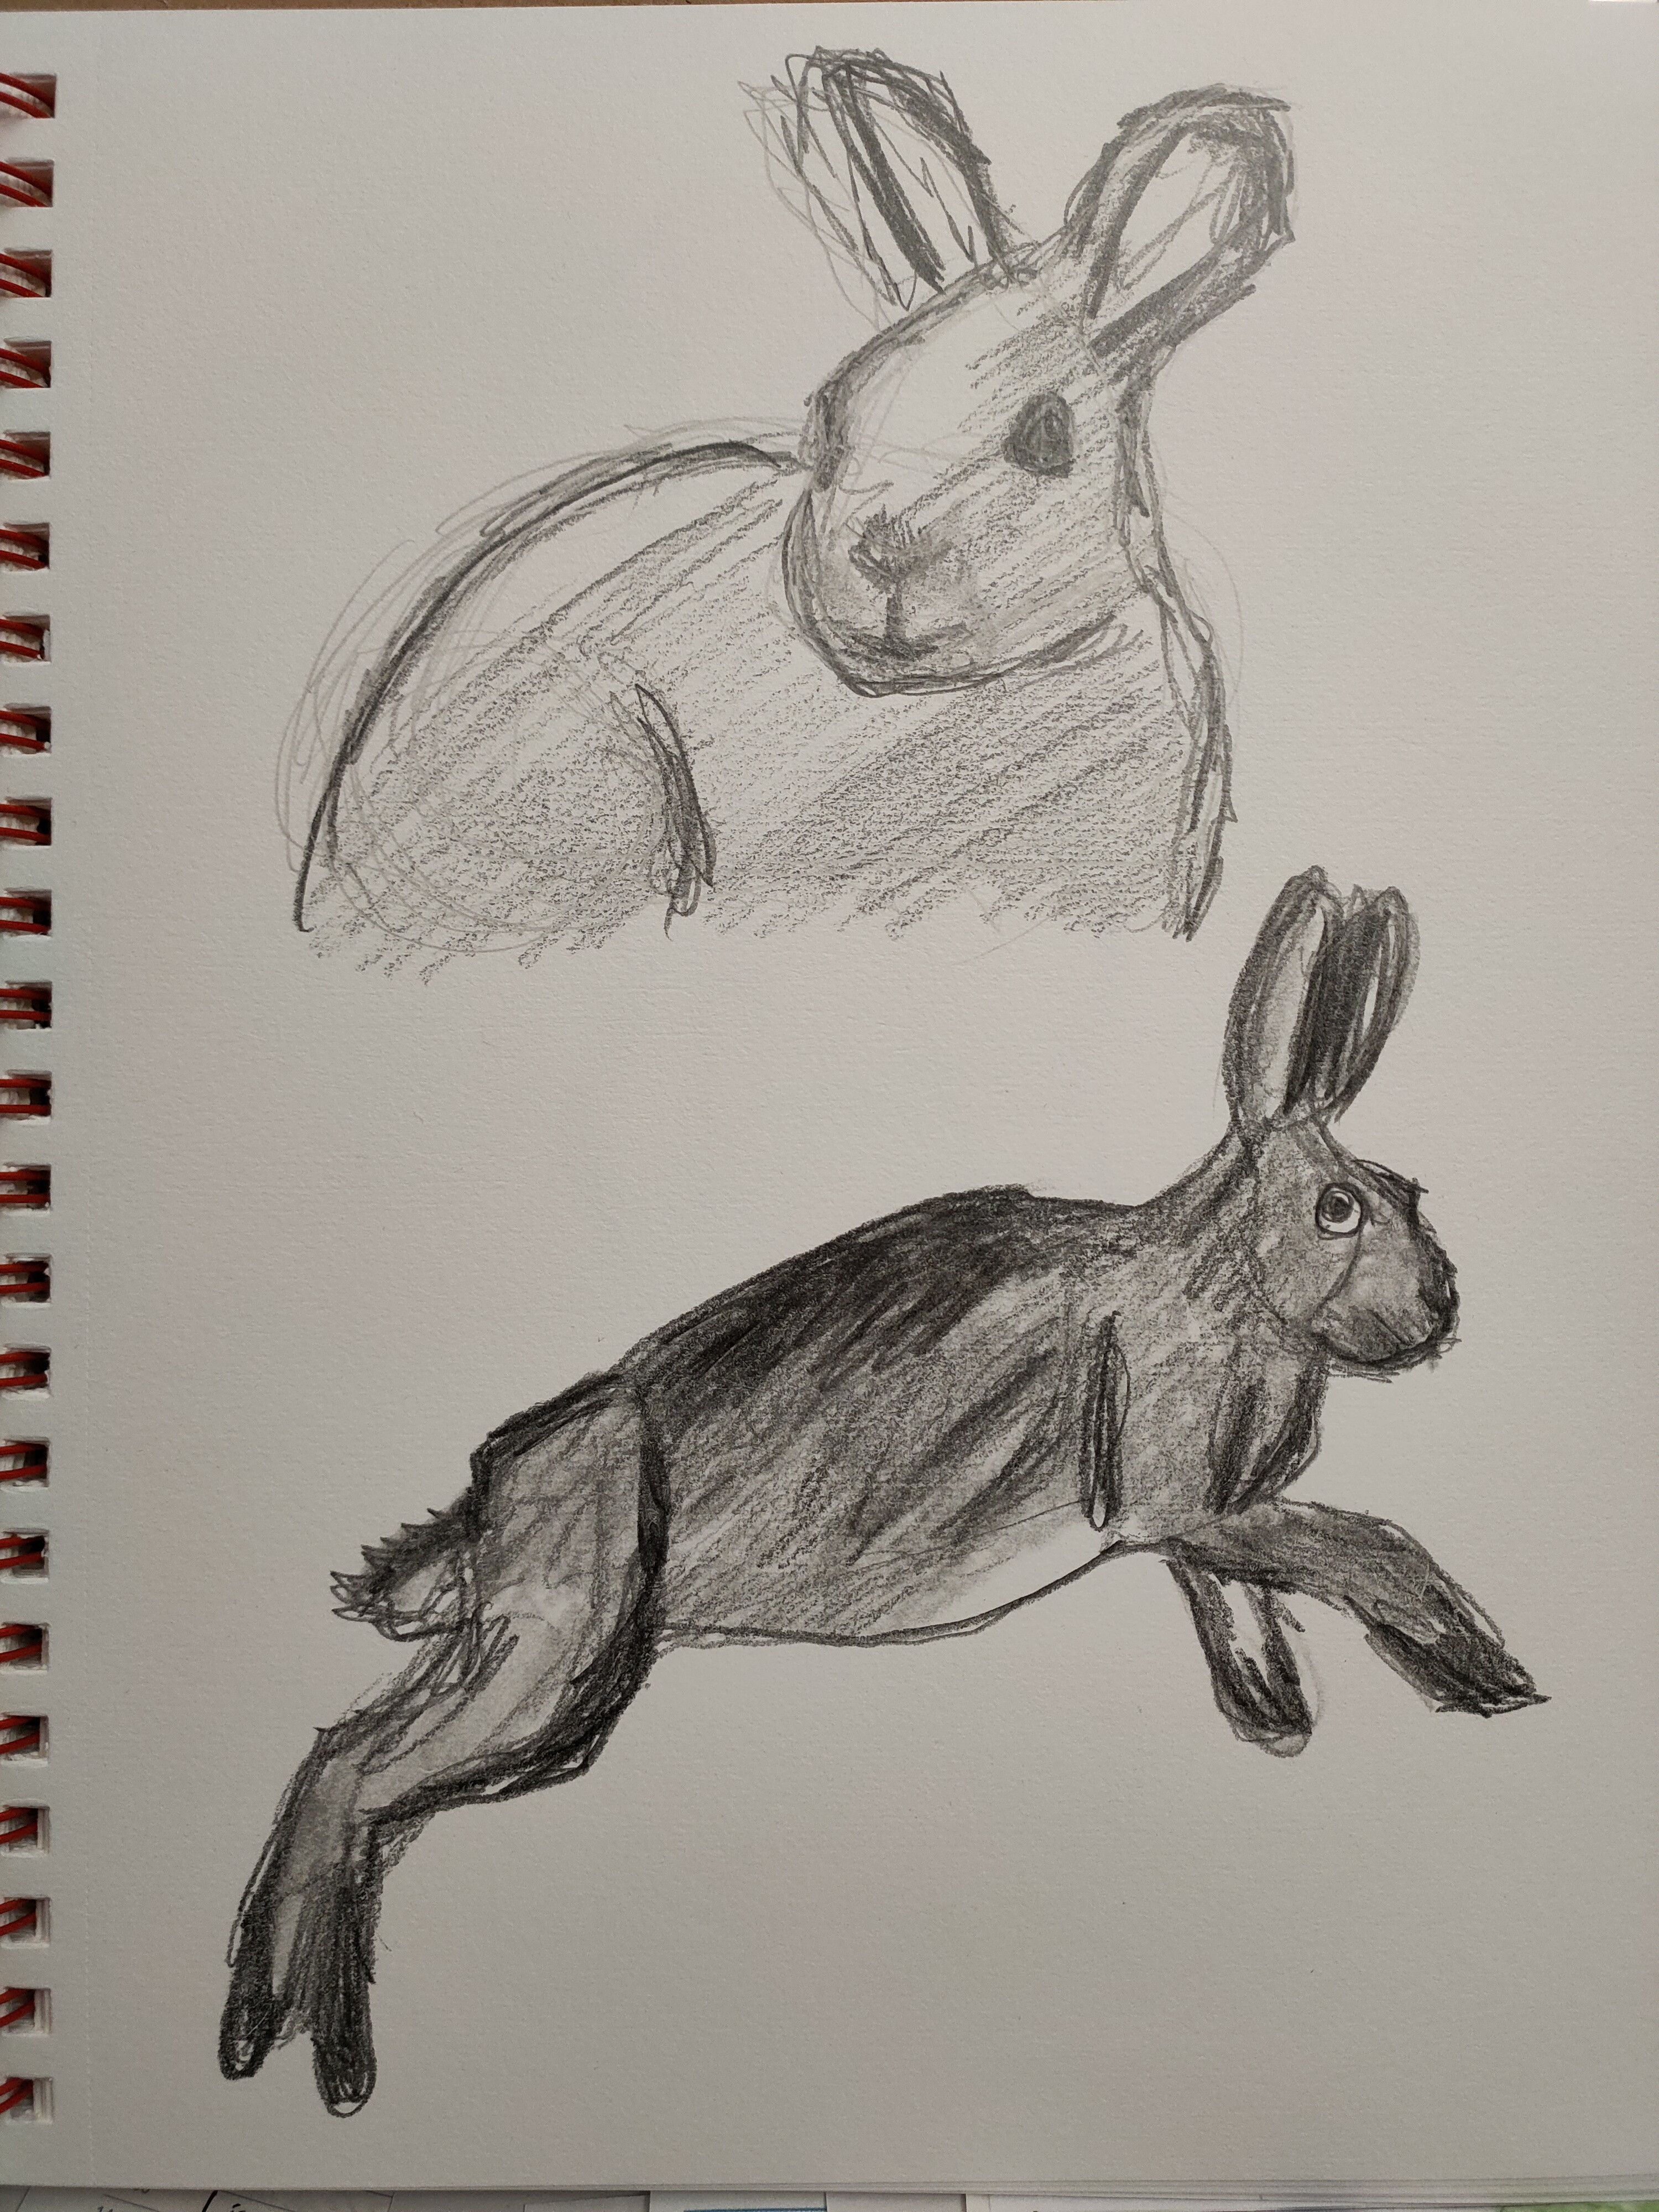 Rabbit sketches.  Life drawings from reference presented on Bobby Chiu's Youtube video "90MAC Life Drawing - RABBITS" 